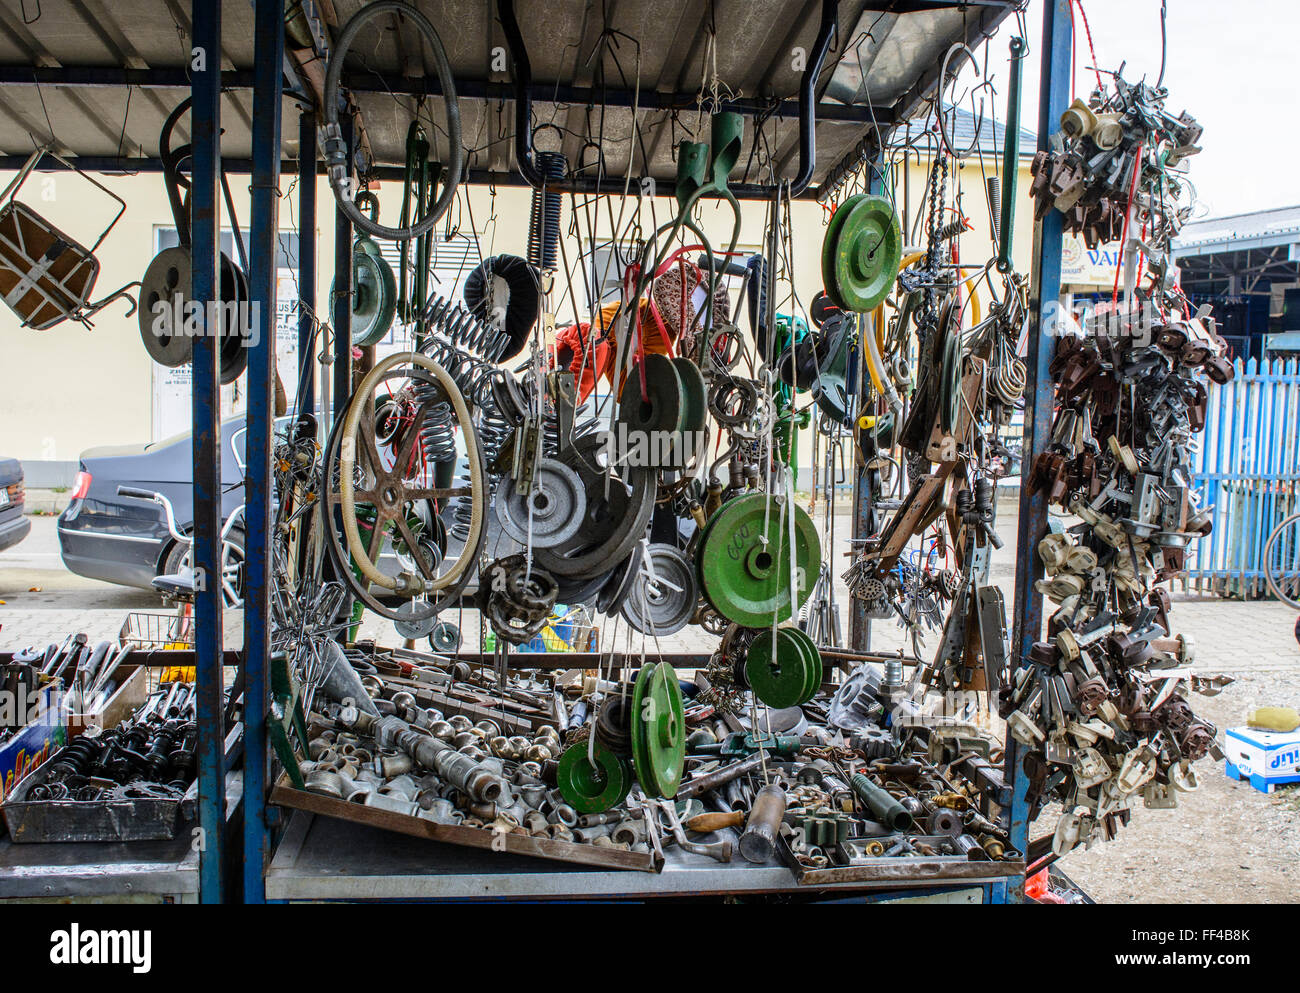 Market stall with old parts for a variety of purposes. Stock Photo